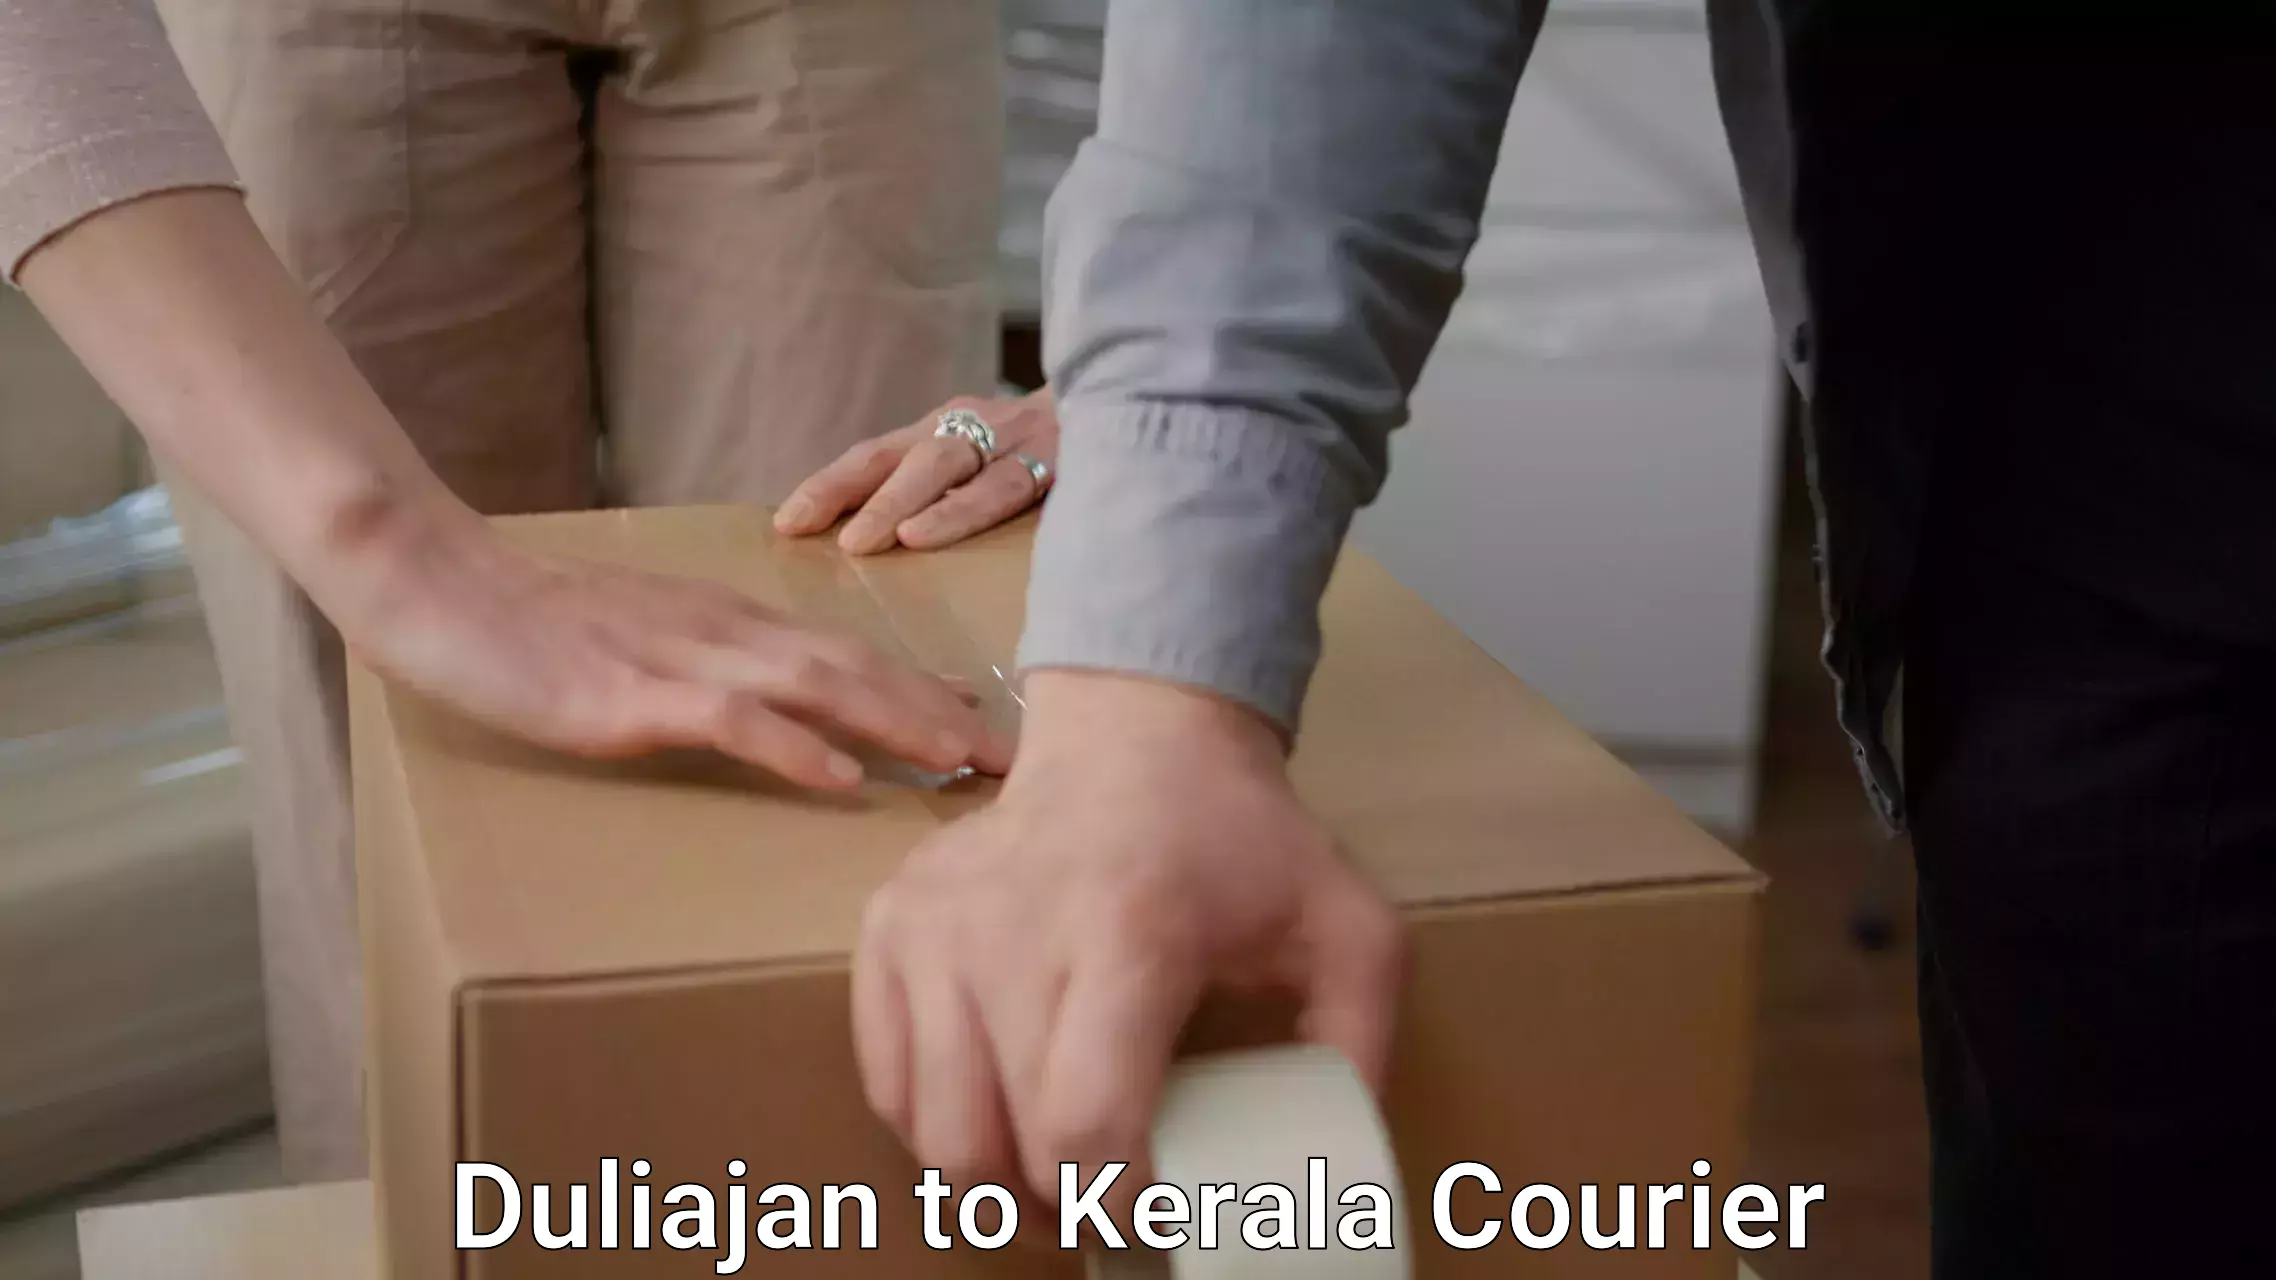 High-quality moving services Duliajan to Kerala